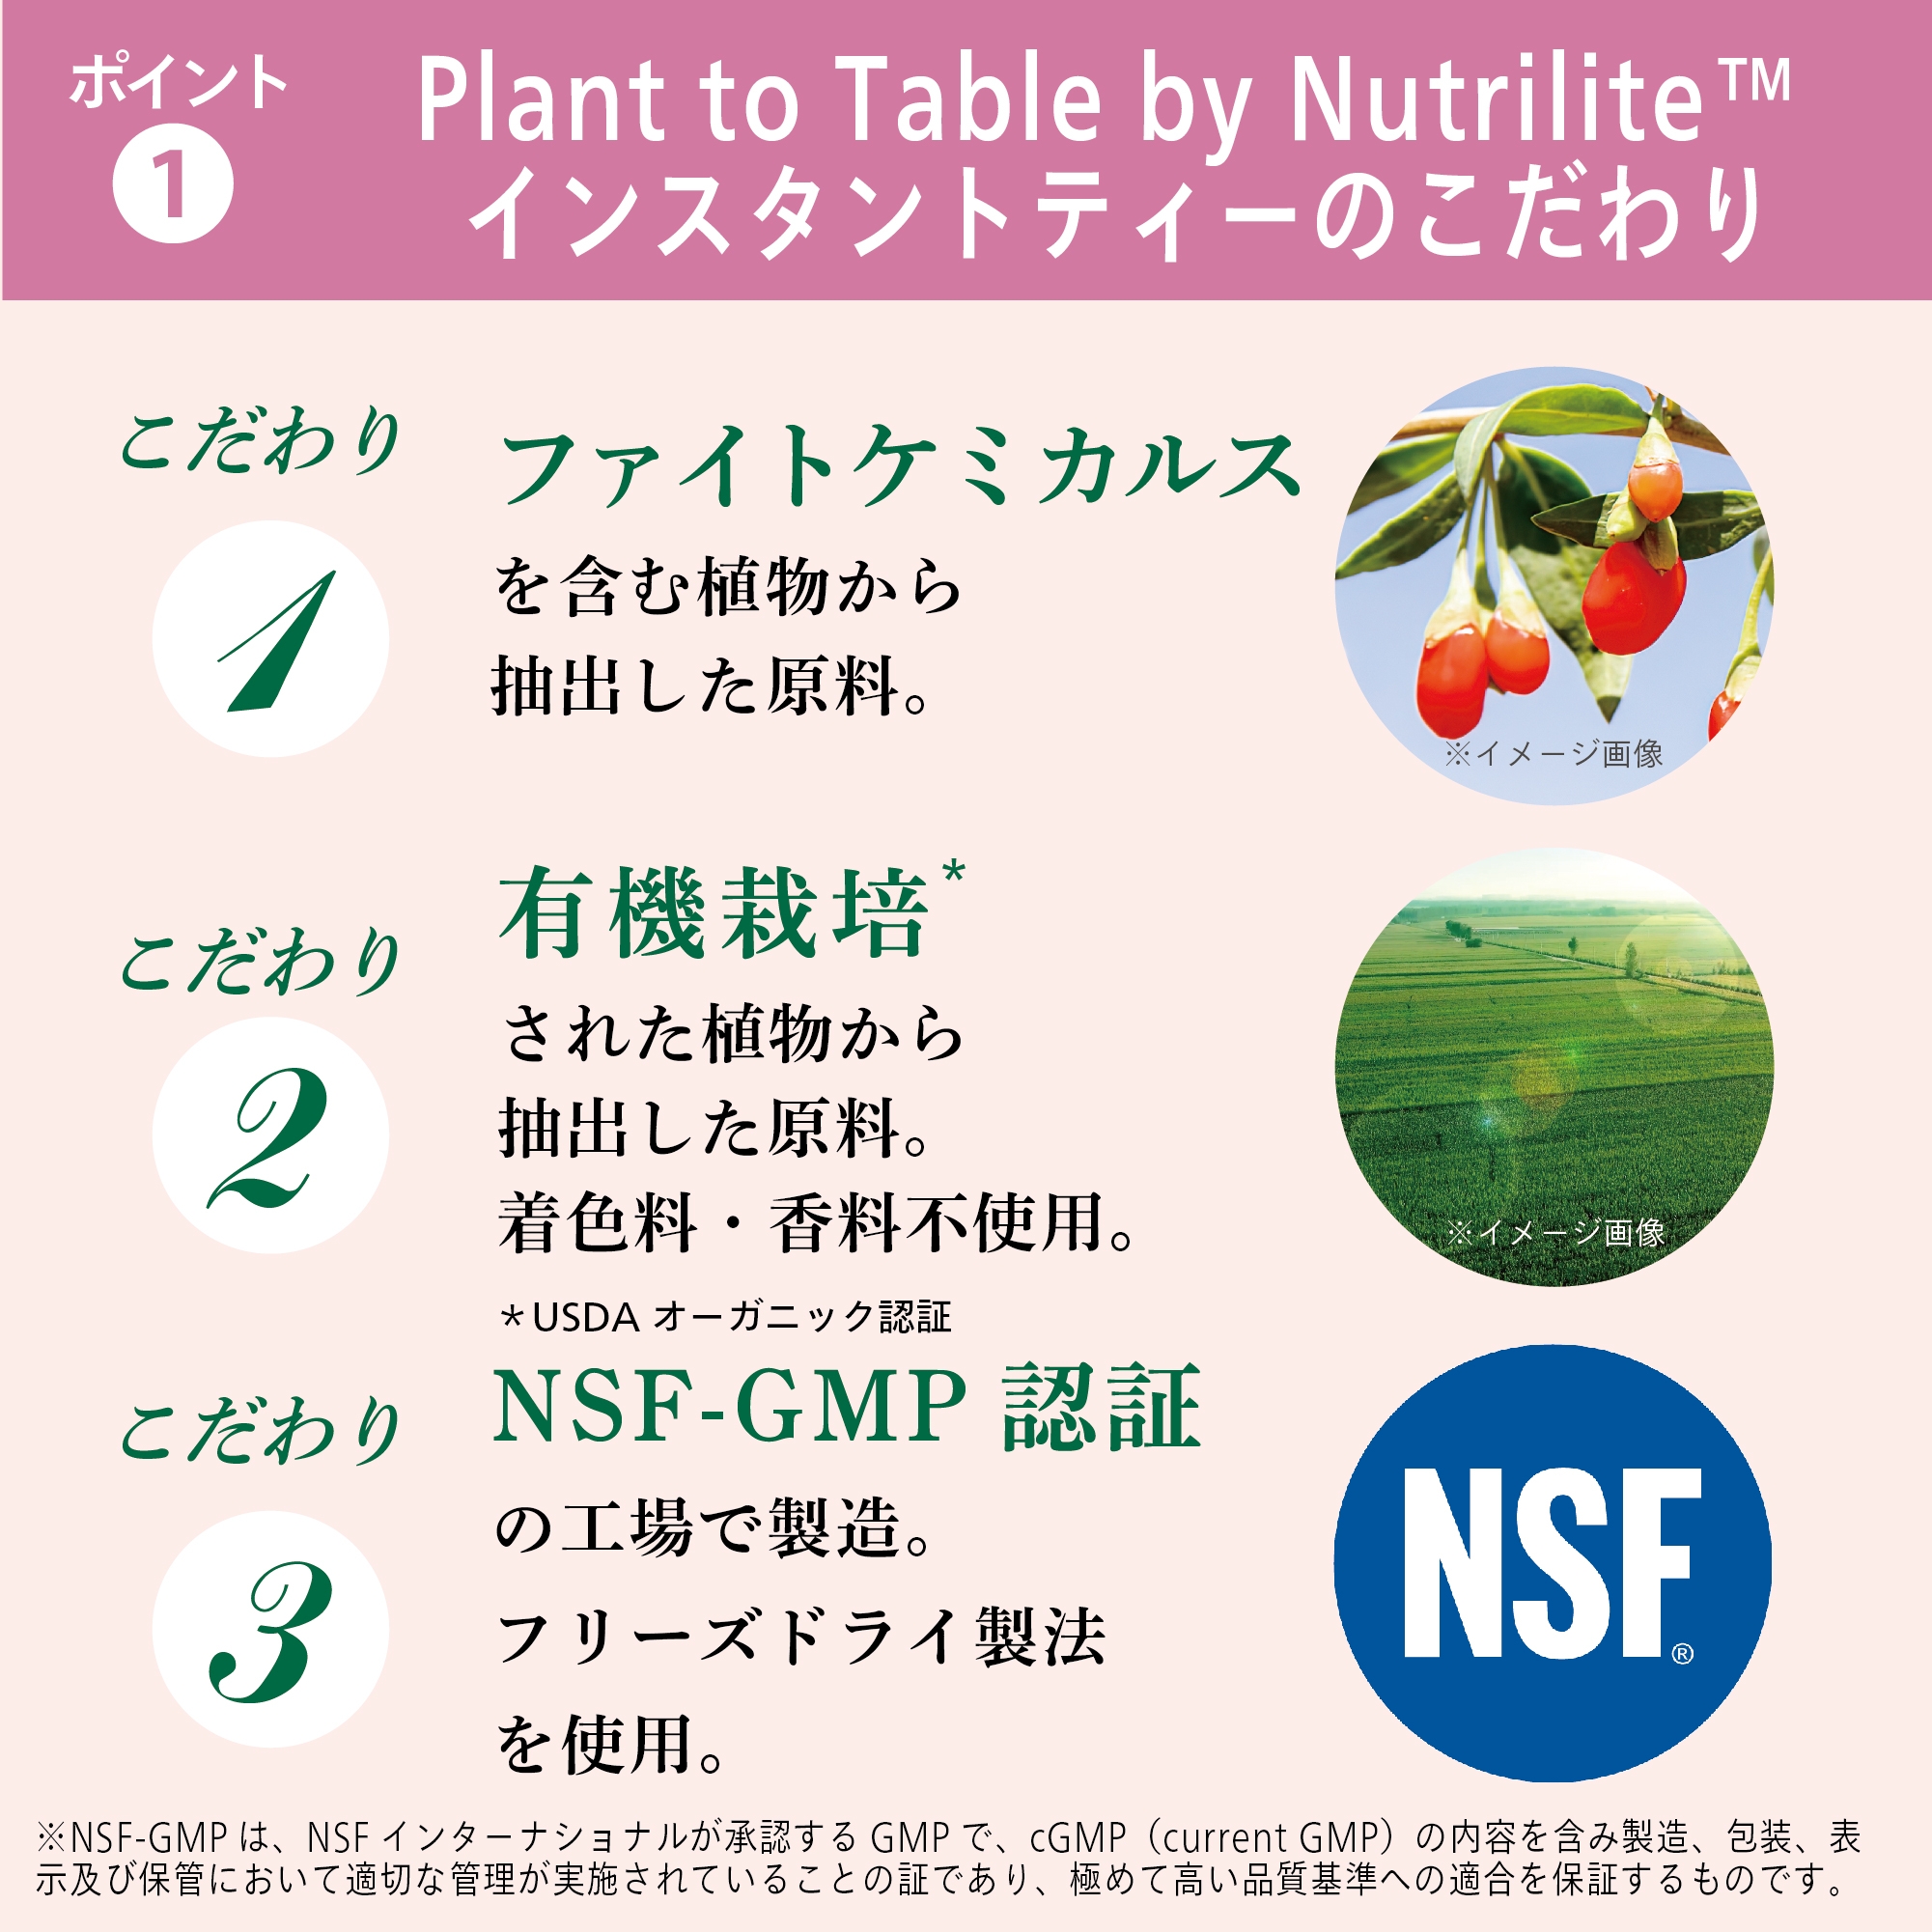 Plant to Table by Nutrilite ローズグリーンティー：Amway 